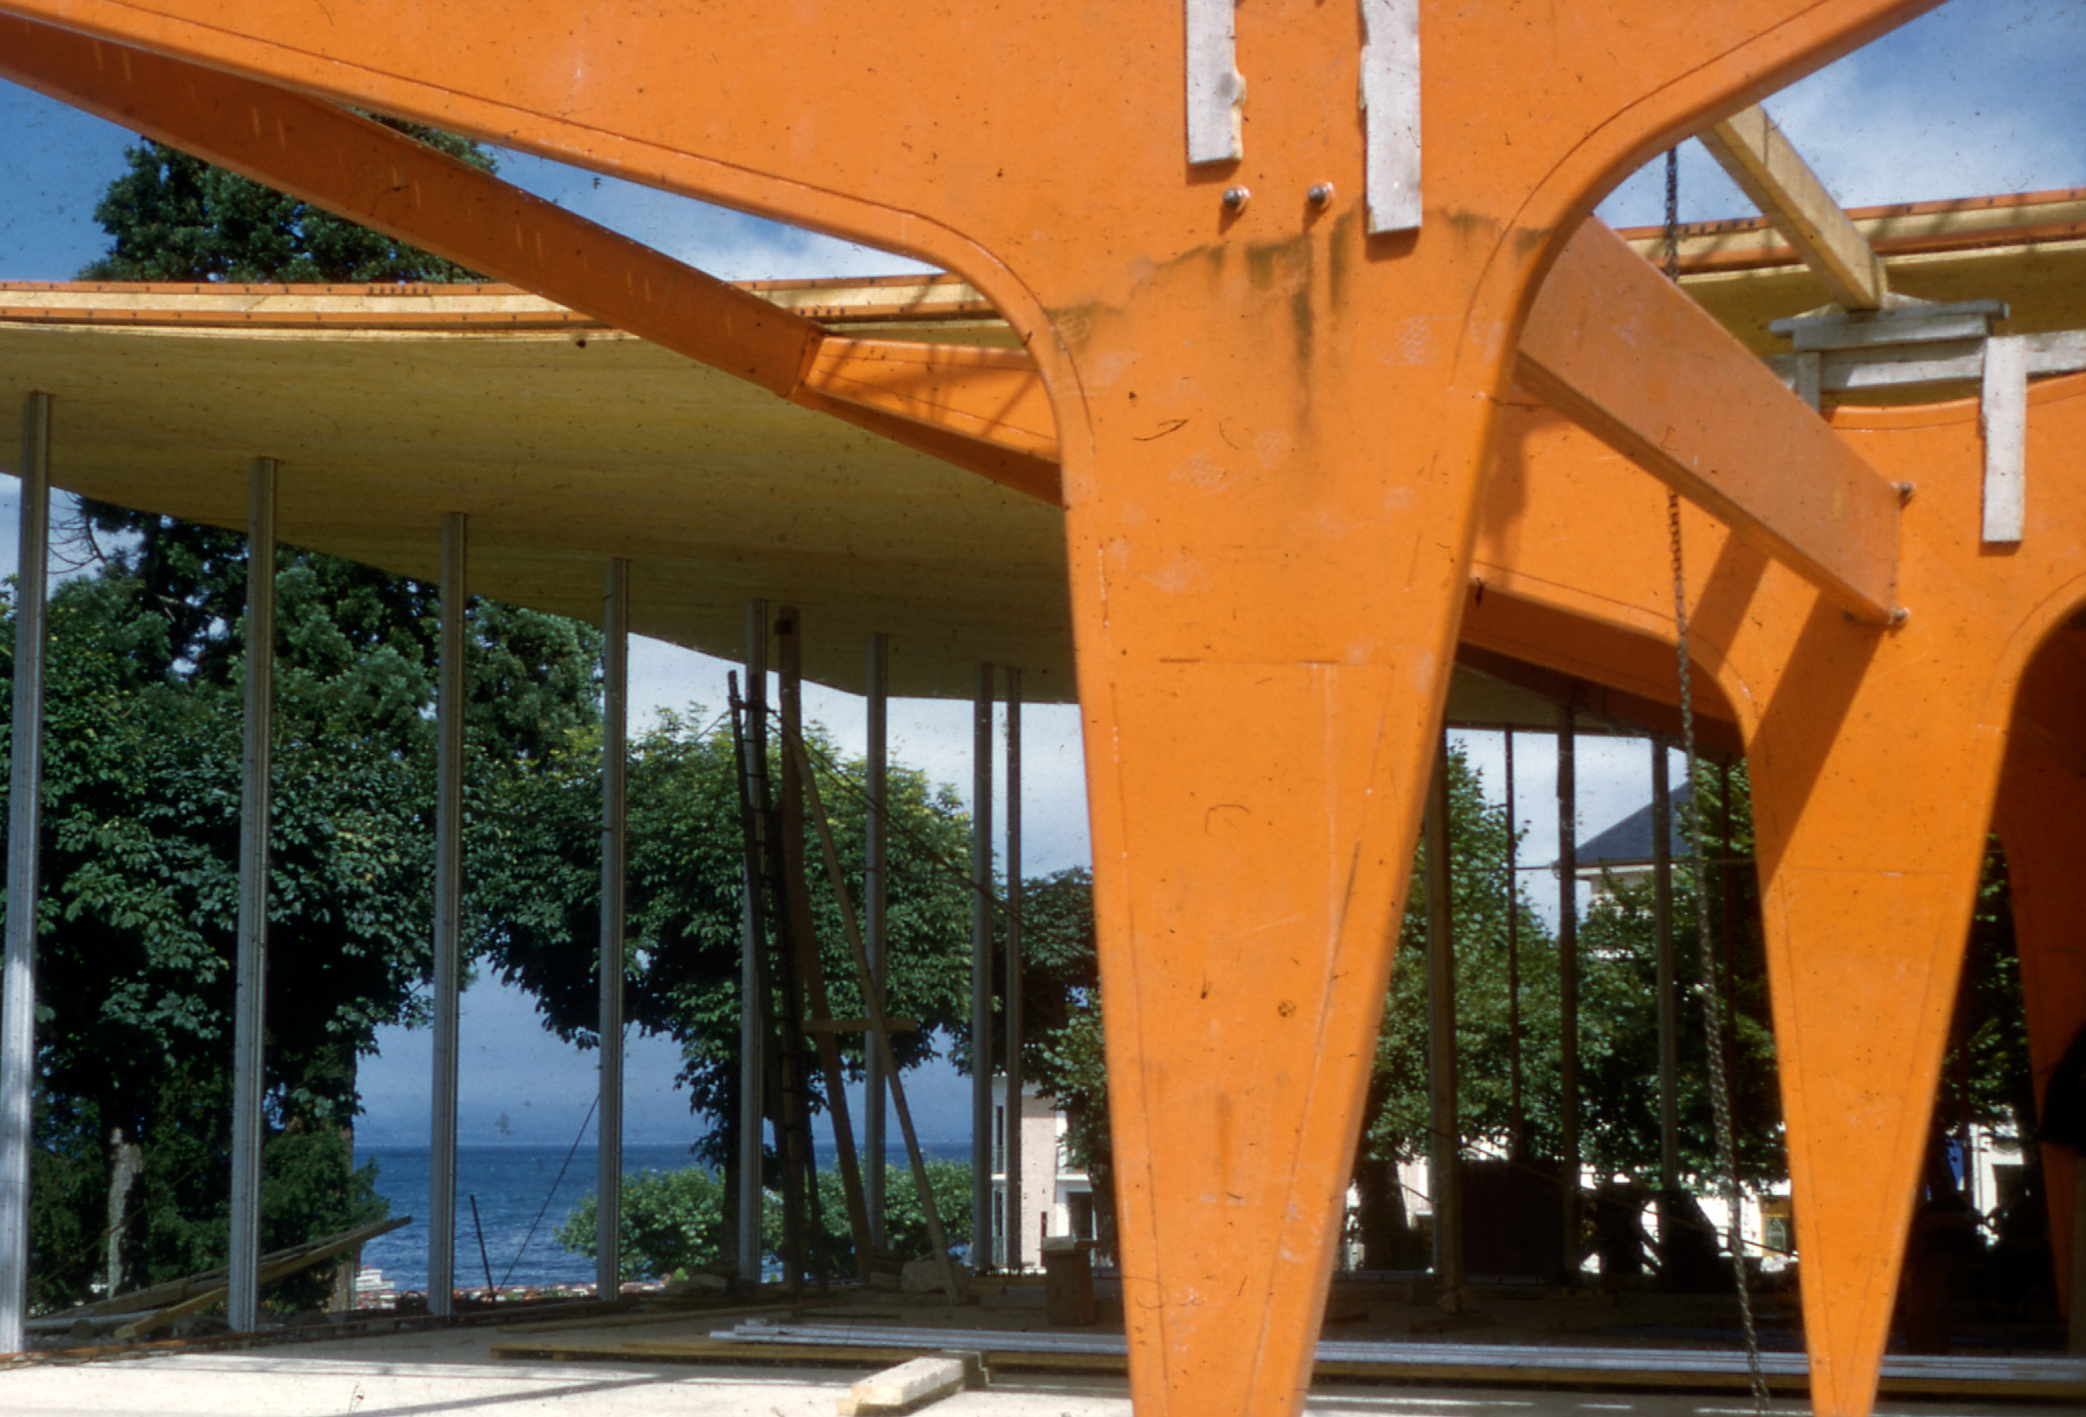 Cachat mineral water pump room, Évian, 1956 (Jean Prouvé, with architect M. Novarina, engineer S. Ketoff). Views of the assembled loadbearing structure and the lake through the building.